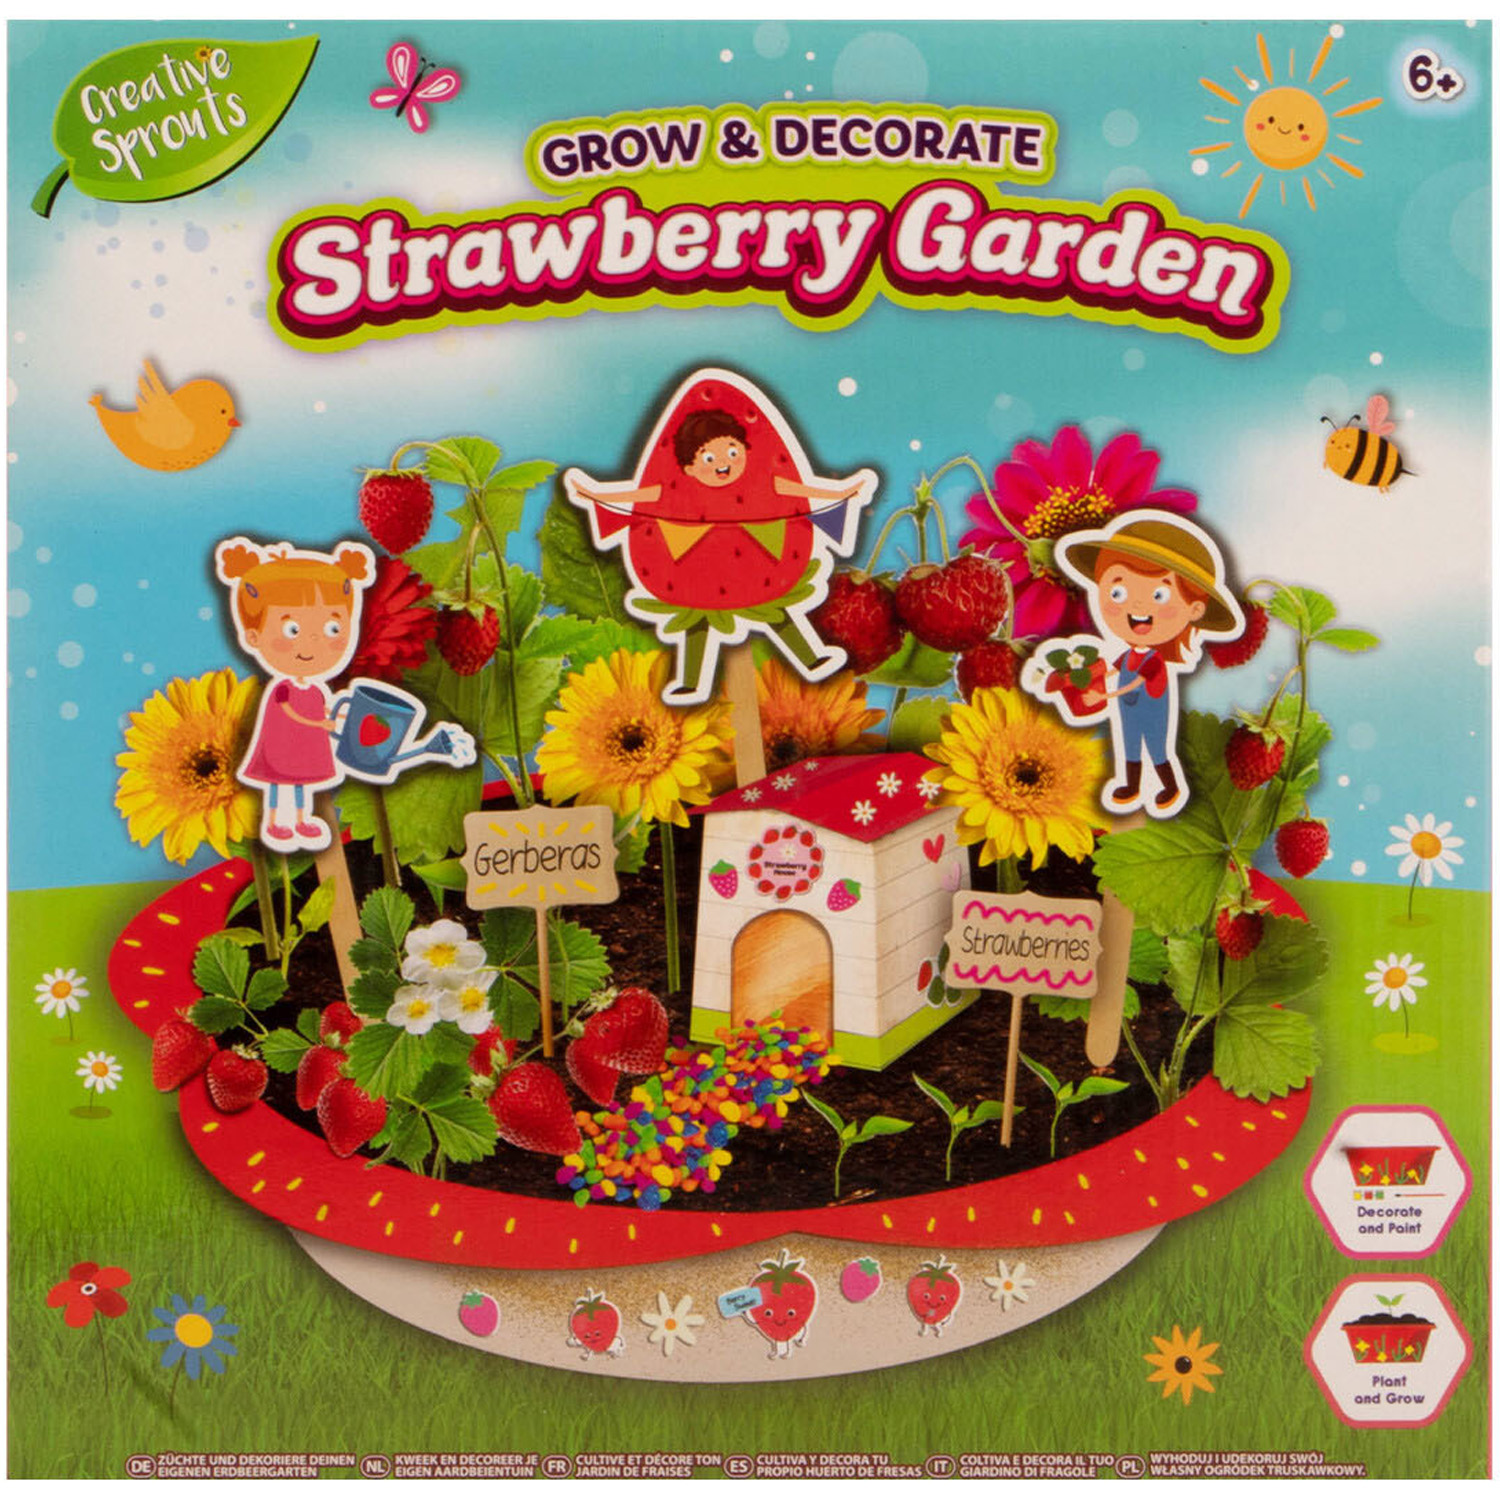 Grow and Decorate Strawberry Garden Image